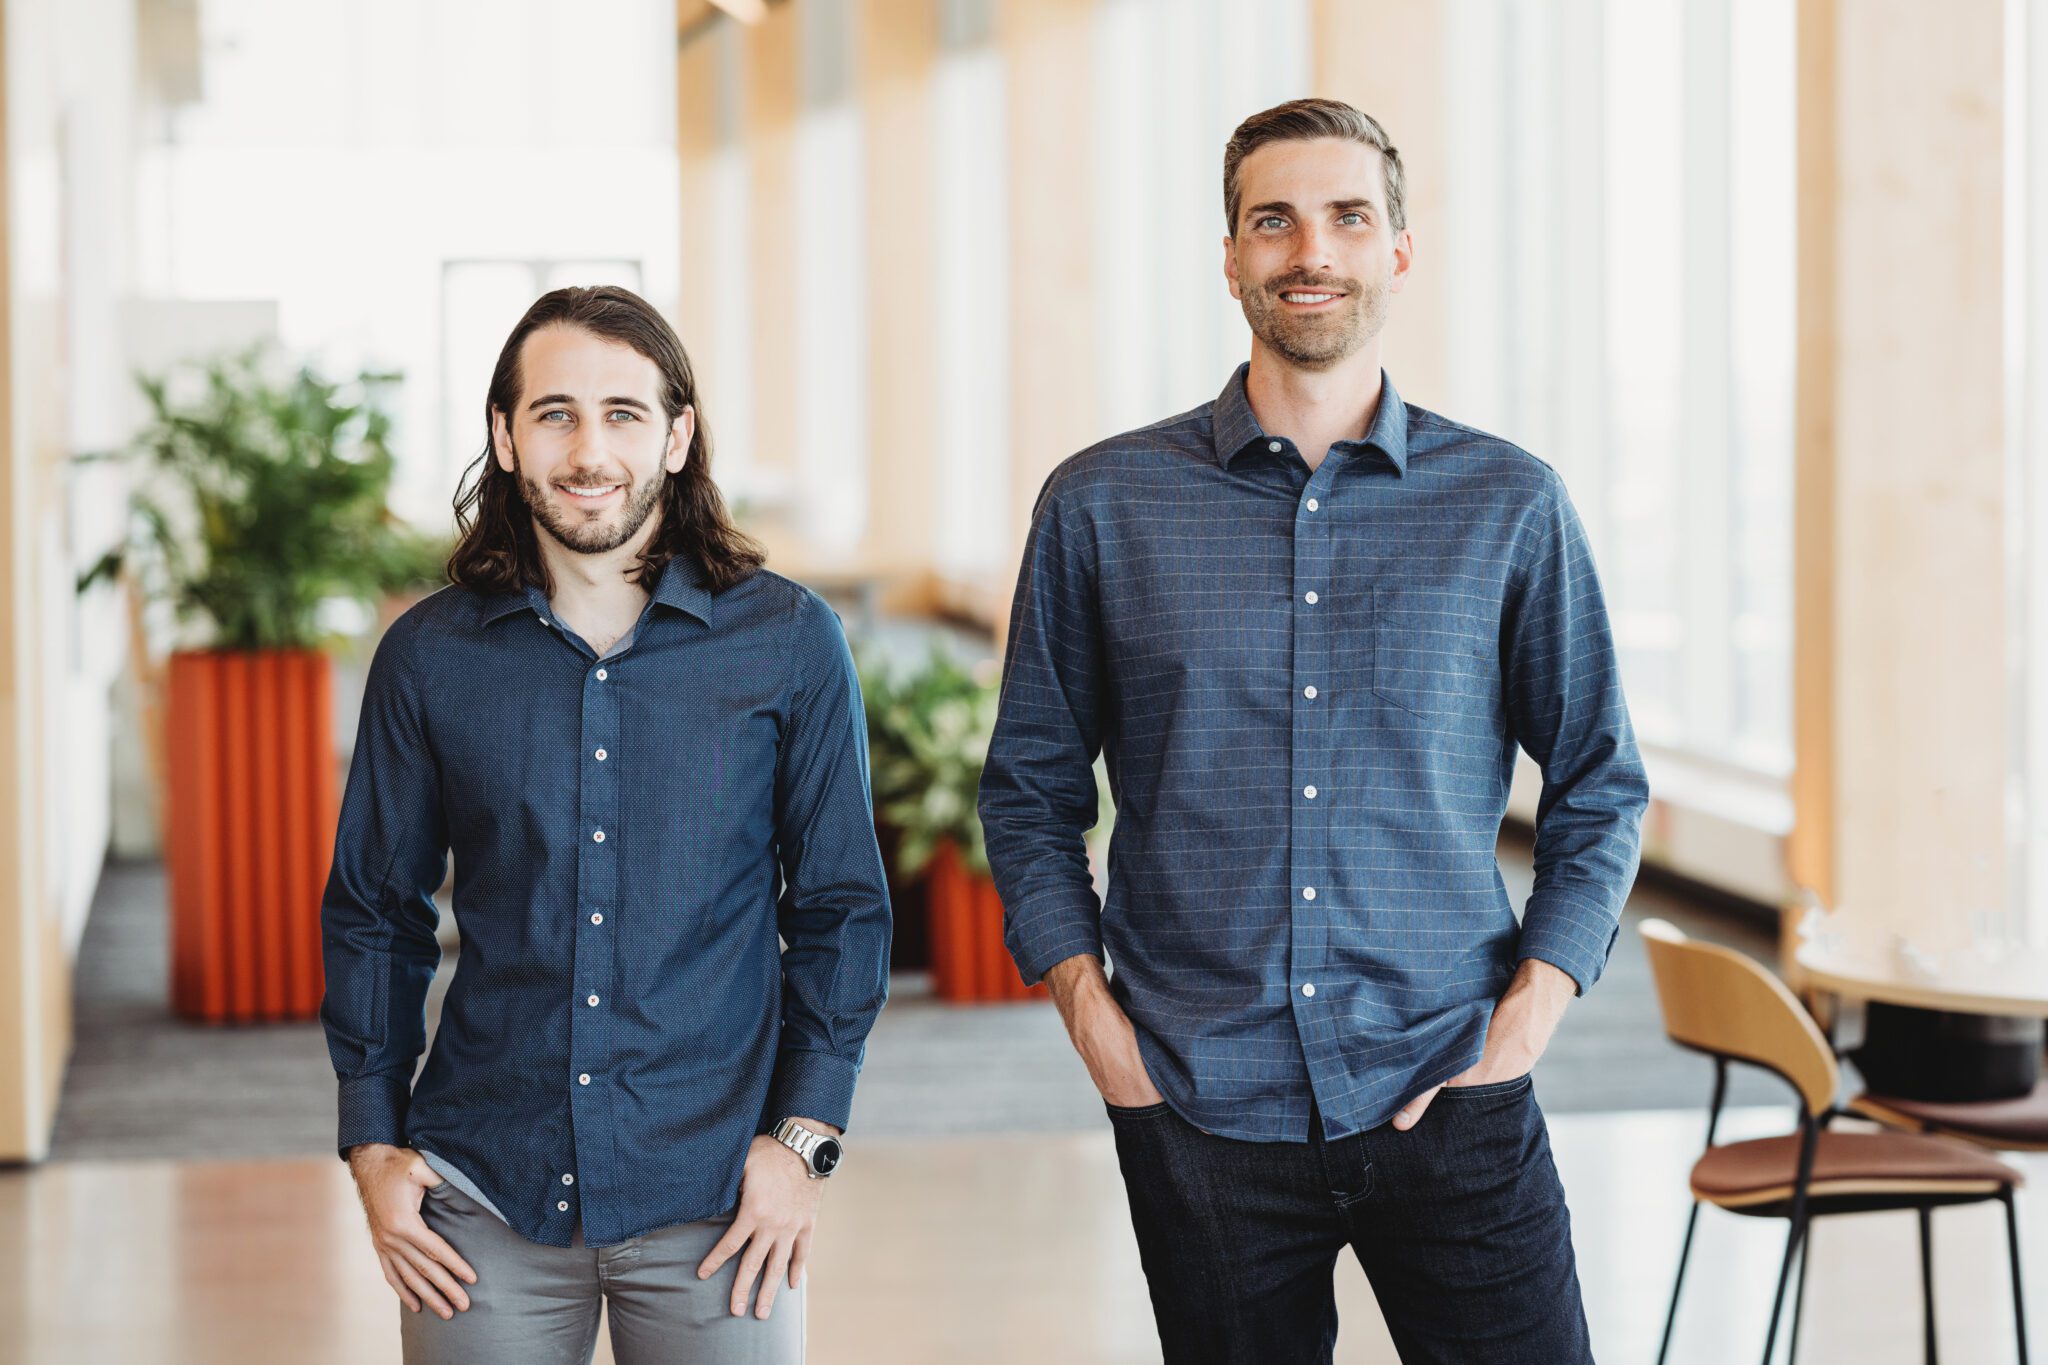 Zencity founder Christopher Lawrence (left) and Frontdesk CEO Jesse DePinto pose in June 2023 to mark Frontdesk's acquisition of Zencity. Source: Frontdesk